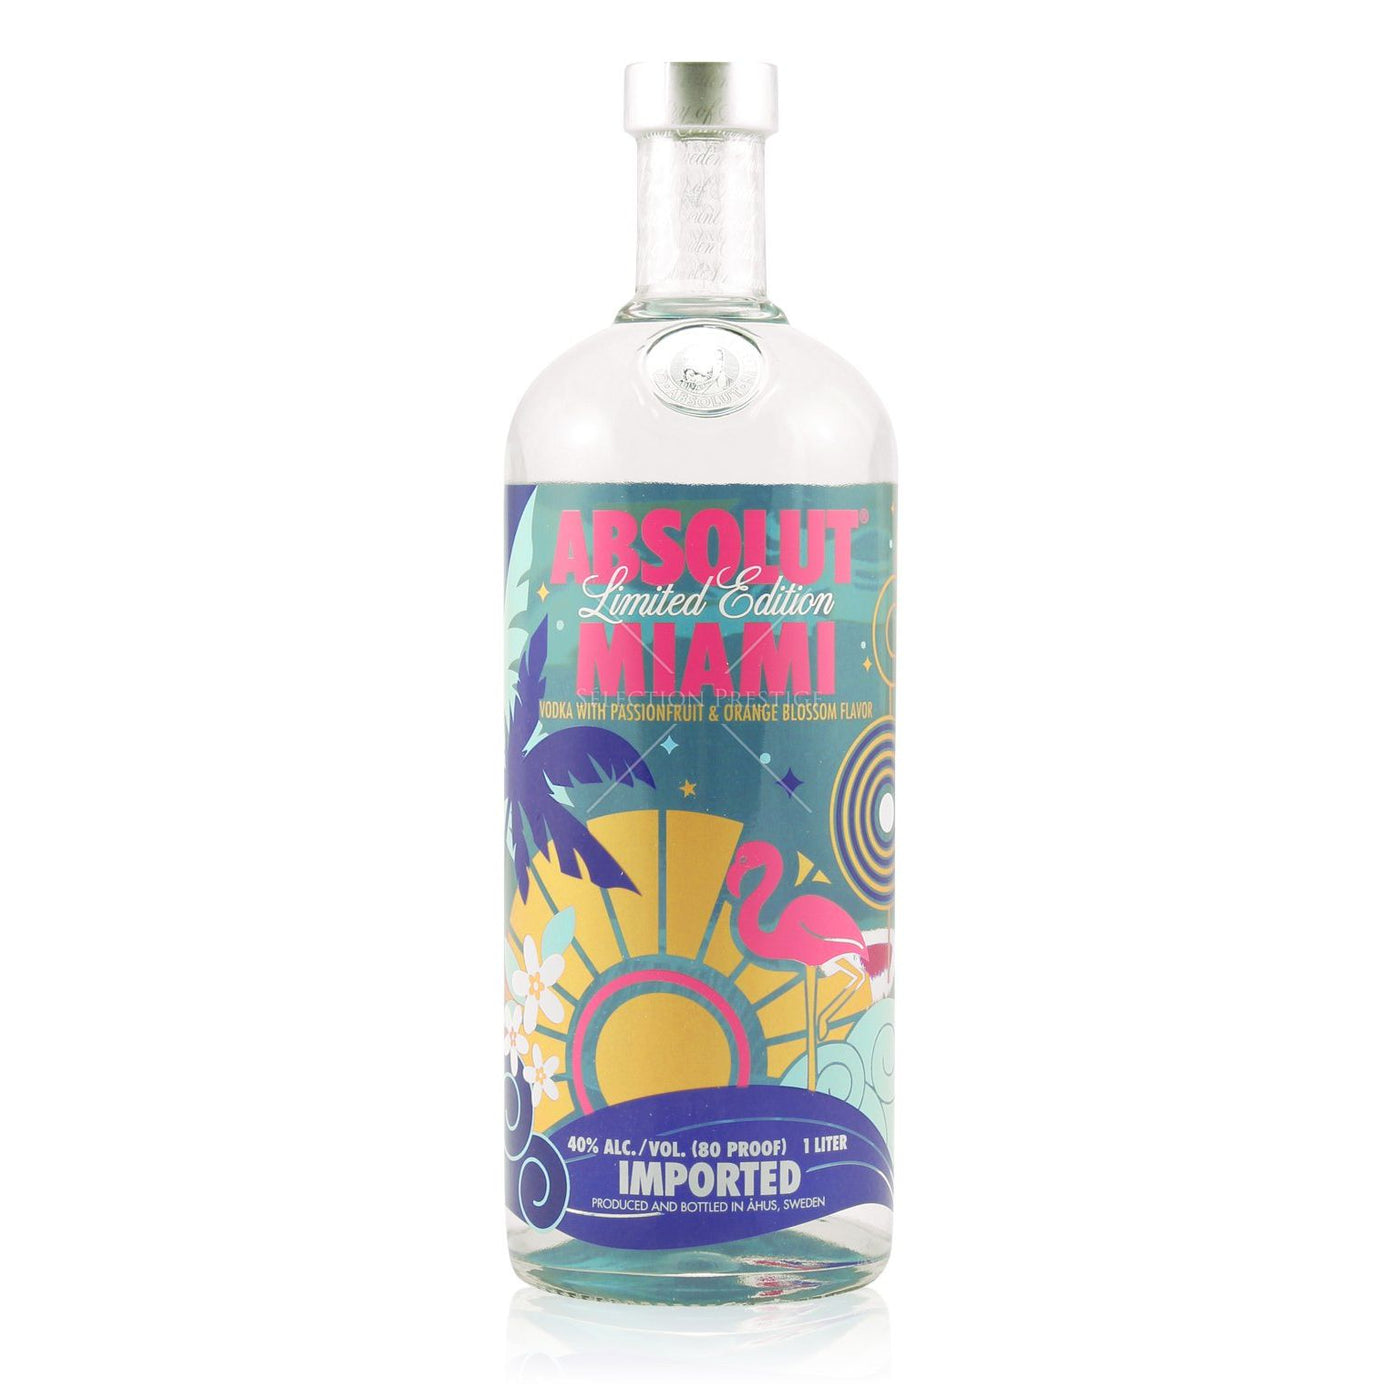 BUY] Absolut Miami Limited Edition Vodka | 1L at